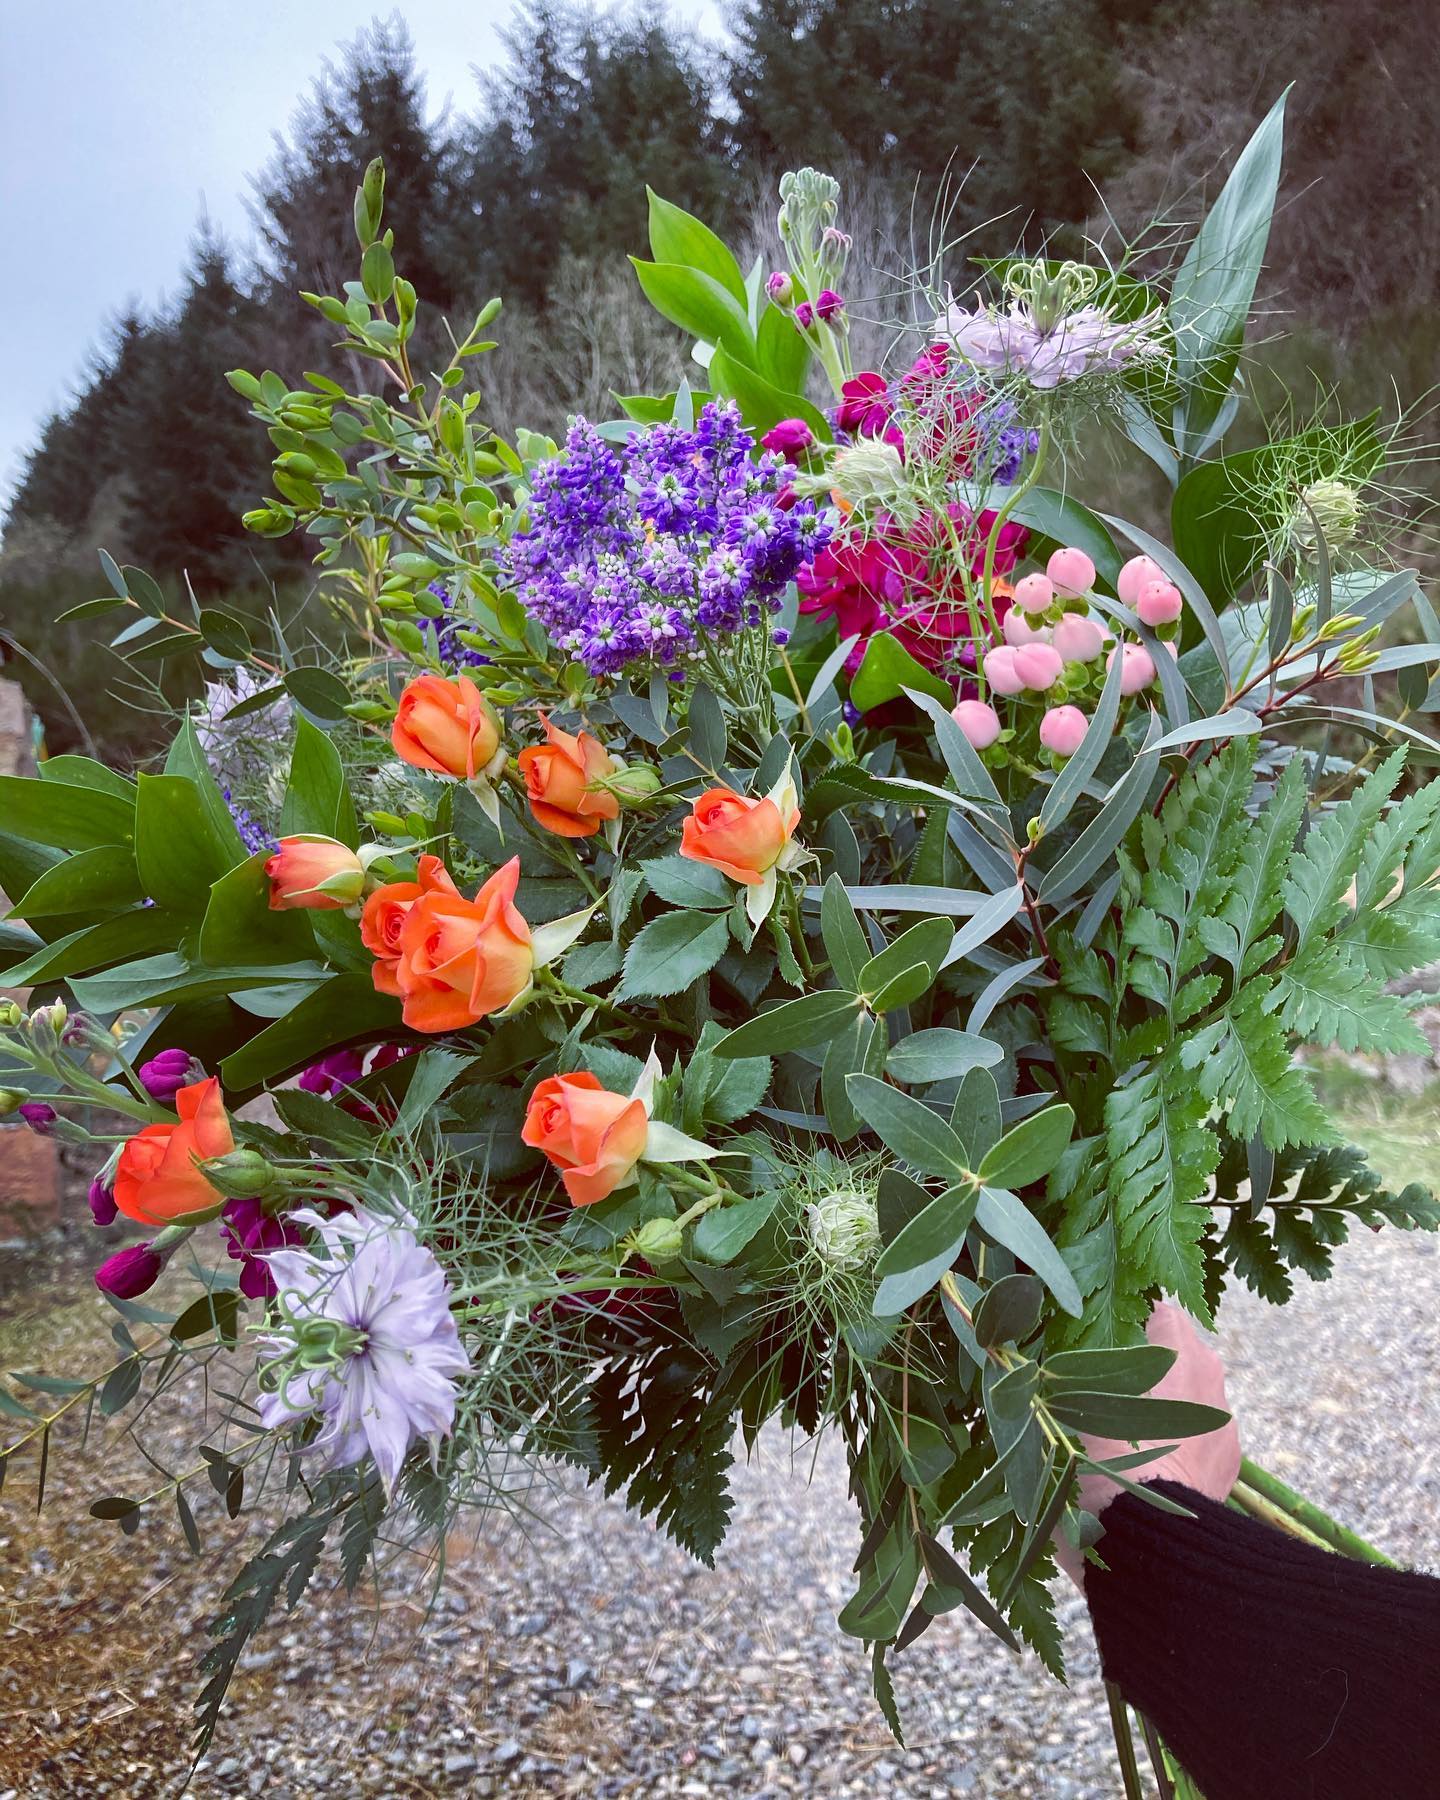 A beautiful bouquet of natural gift flowers. Florist is Rachel's Country Flowers in Edderton, near Dornoch and Tain in the Scottish Highlands